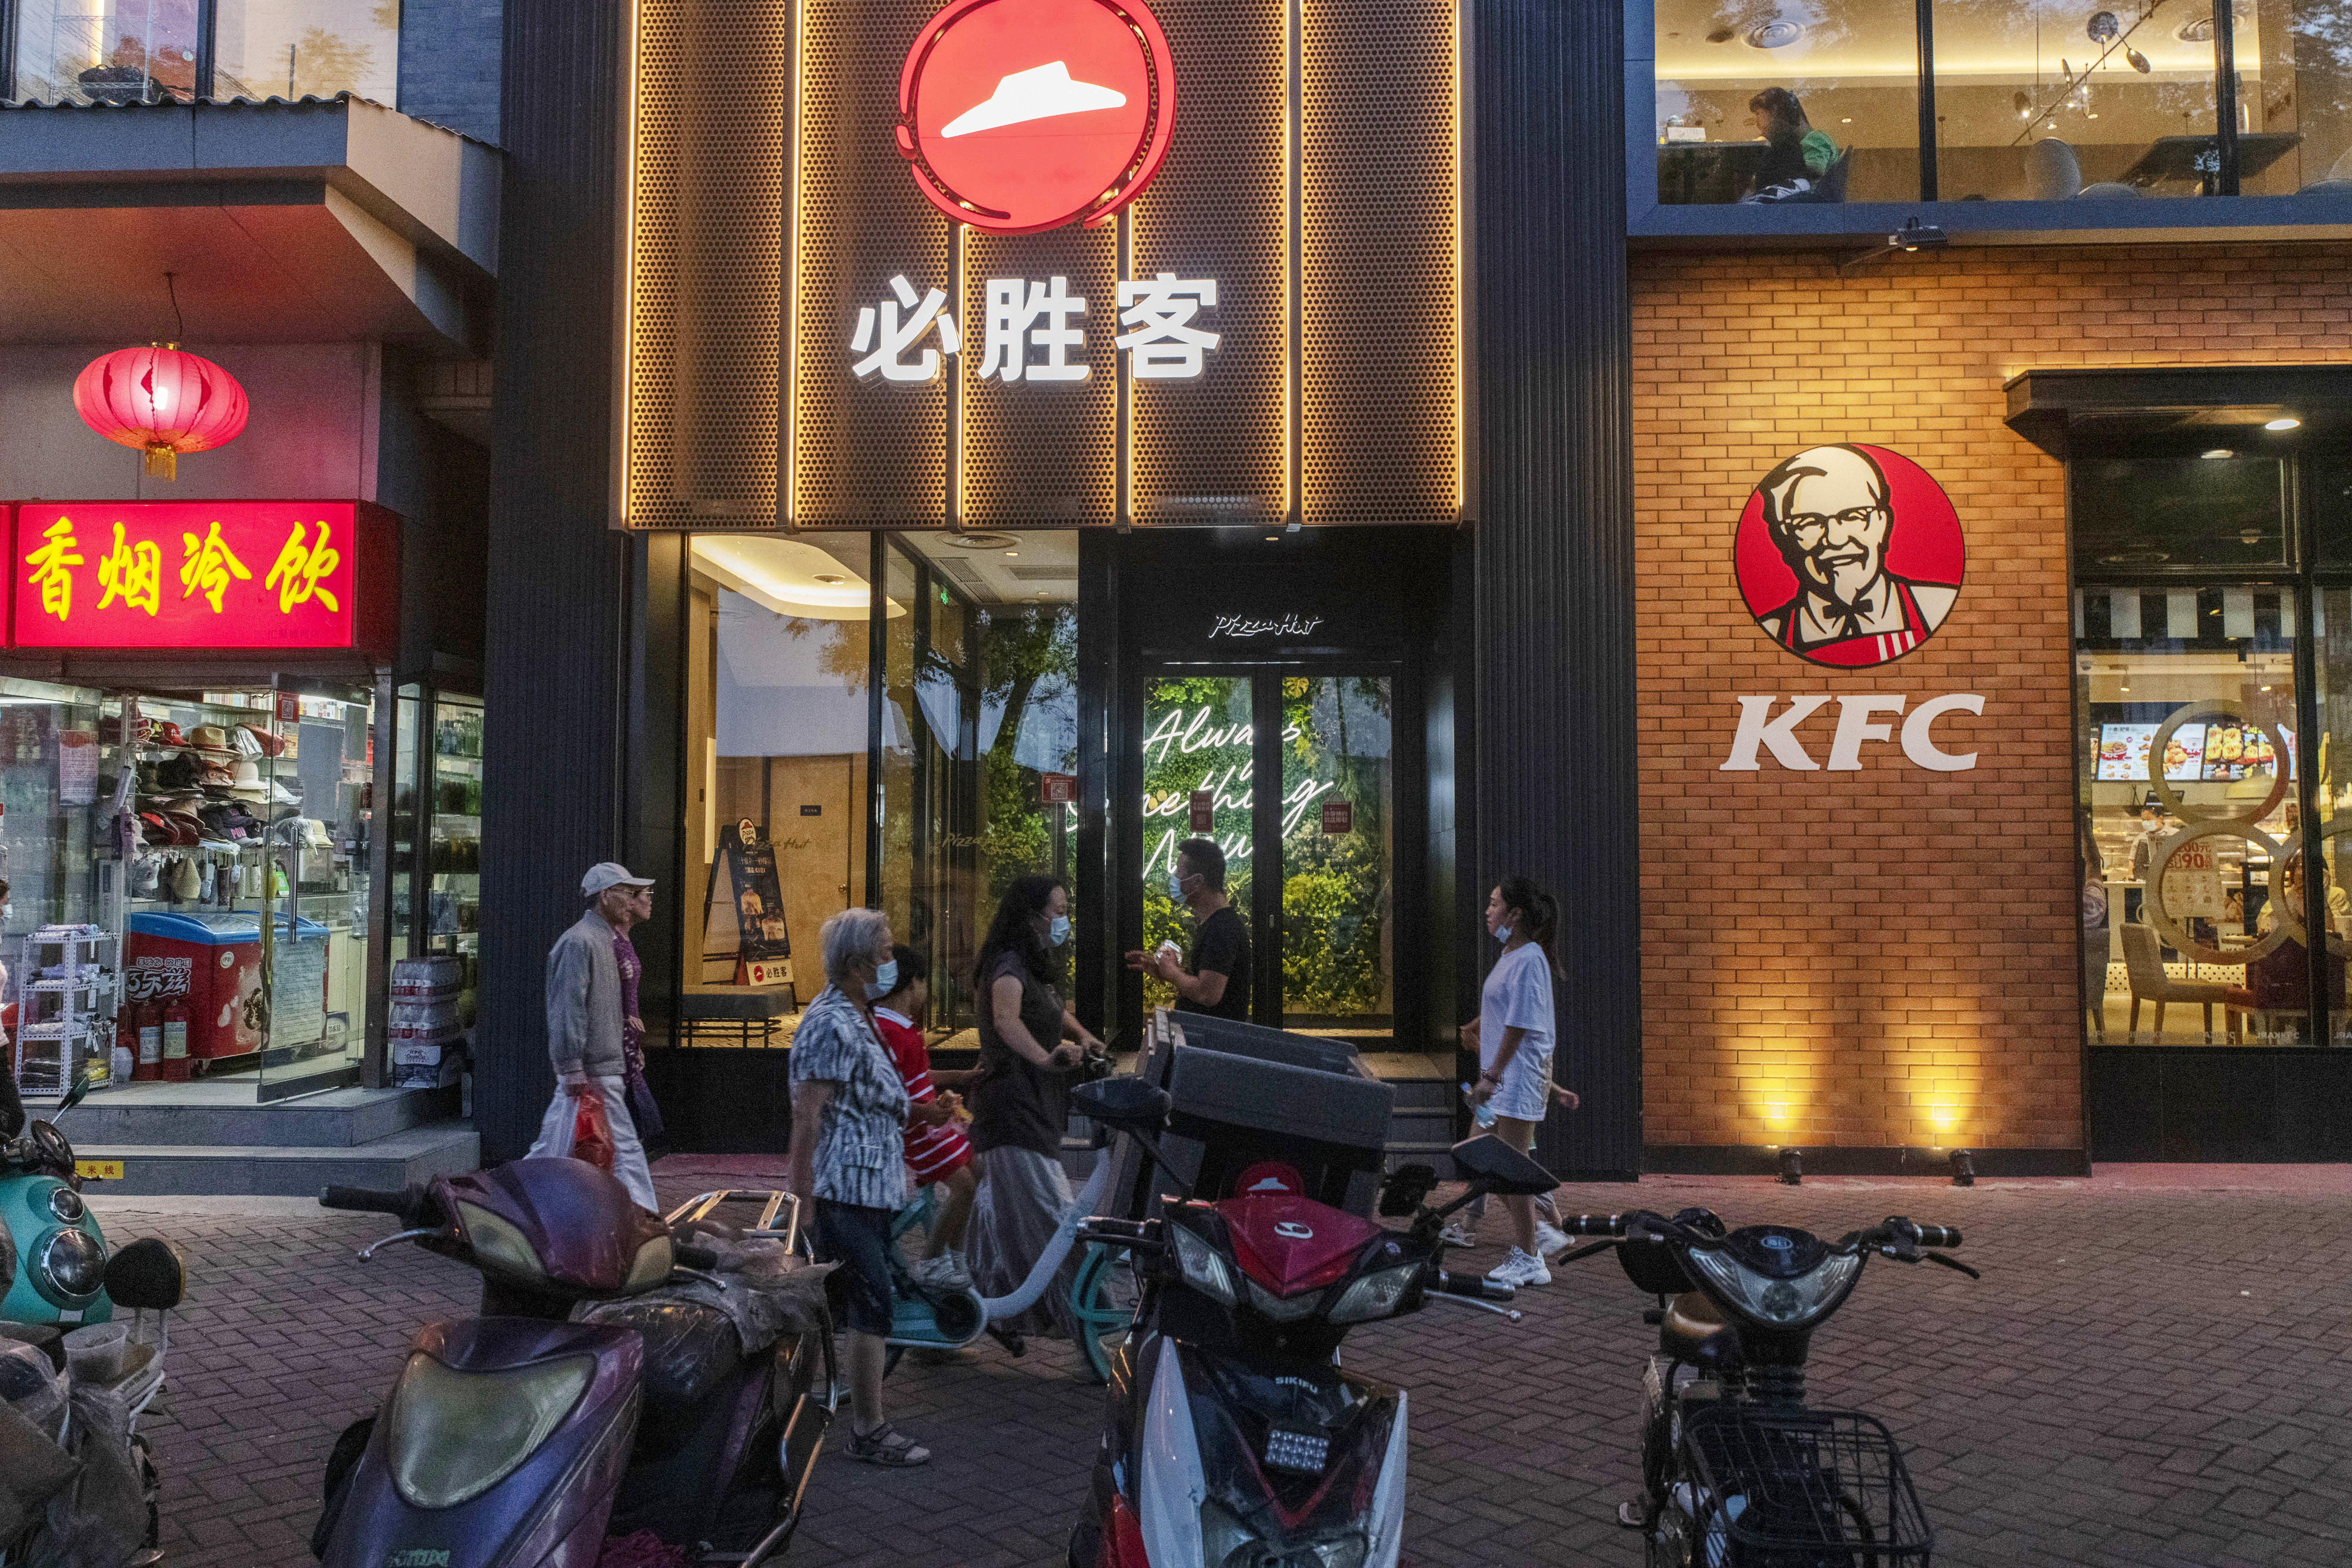 Pedestrians walk past a Pizza Hut restaurant and a KFC restaurant, both operated by Yum China, in Beijing n September 2020. Photo: Bloomberg